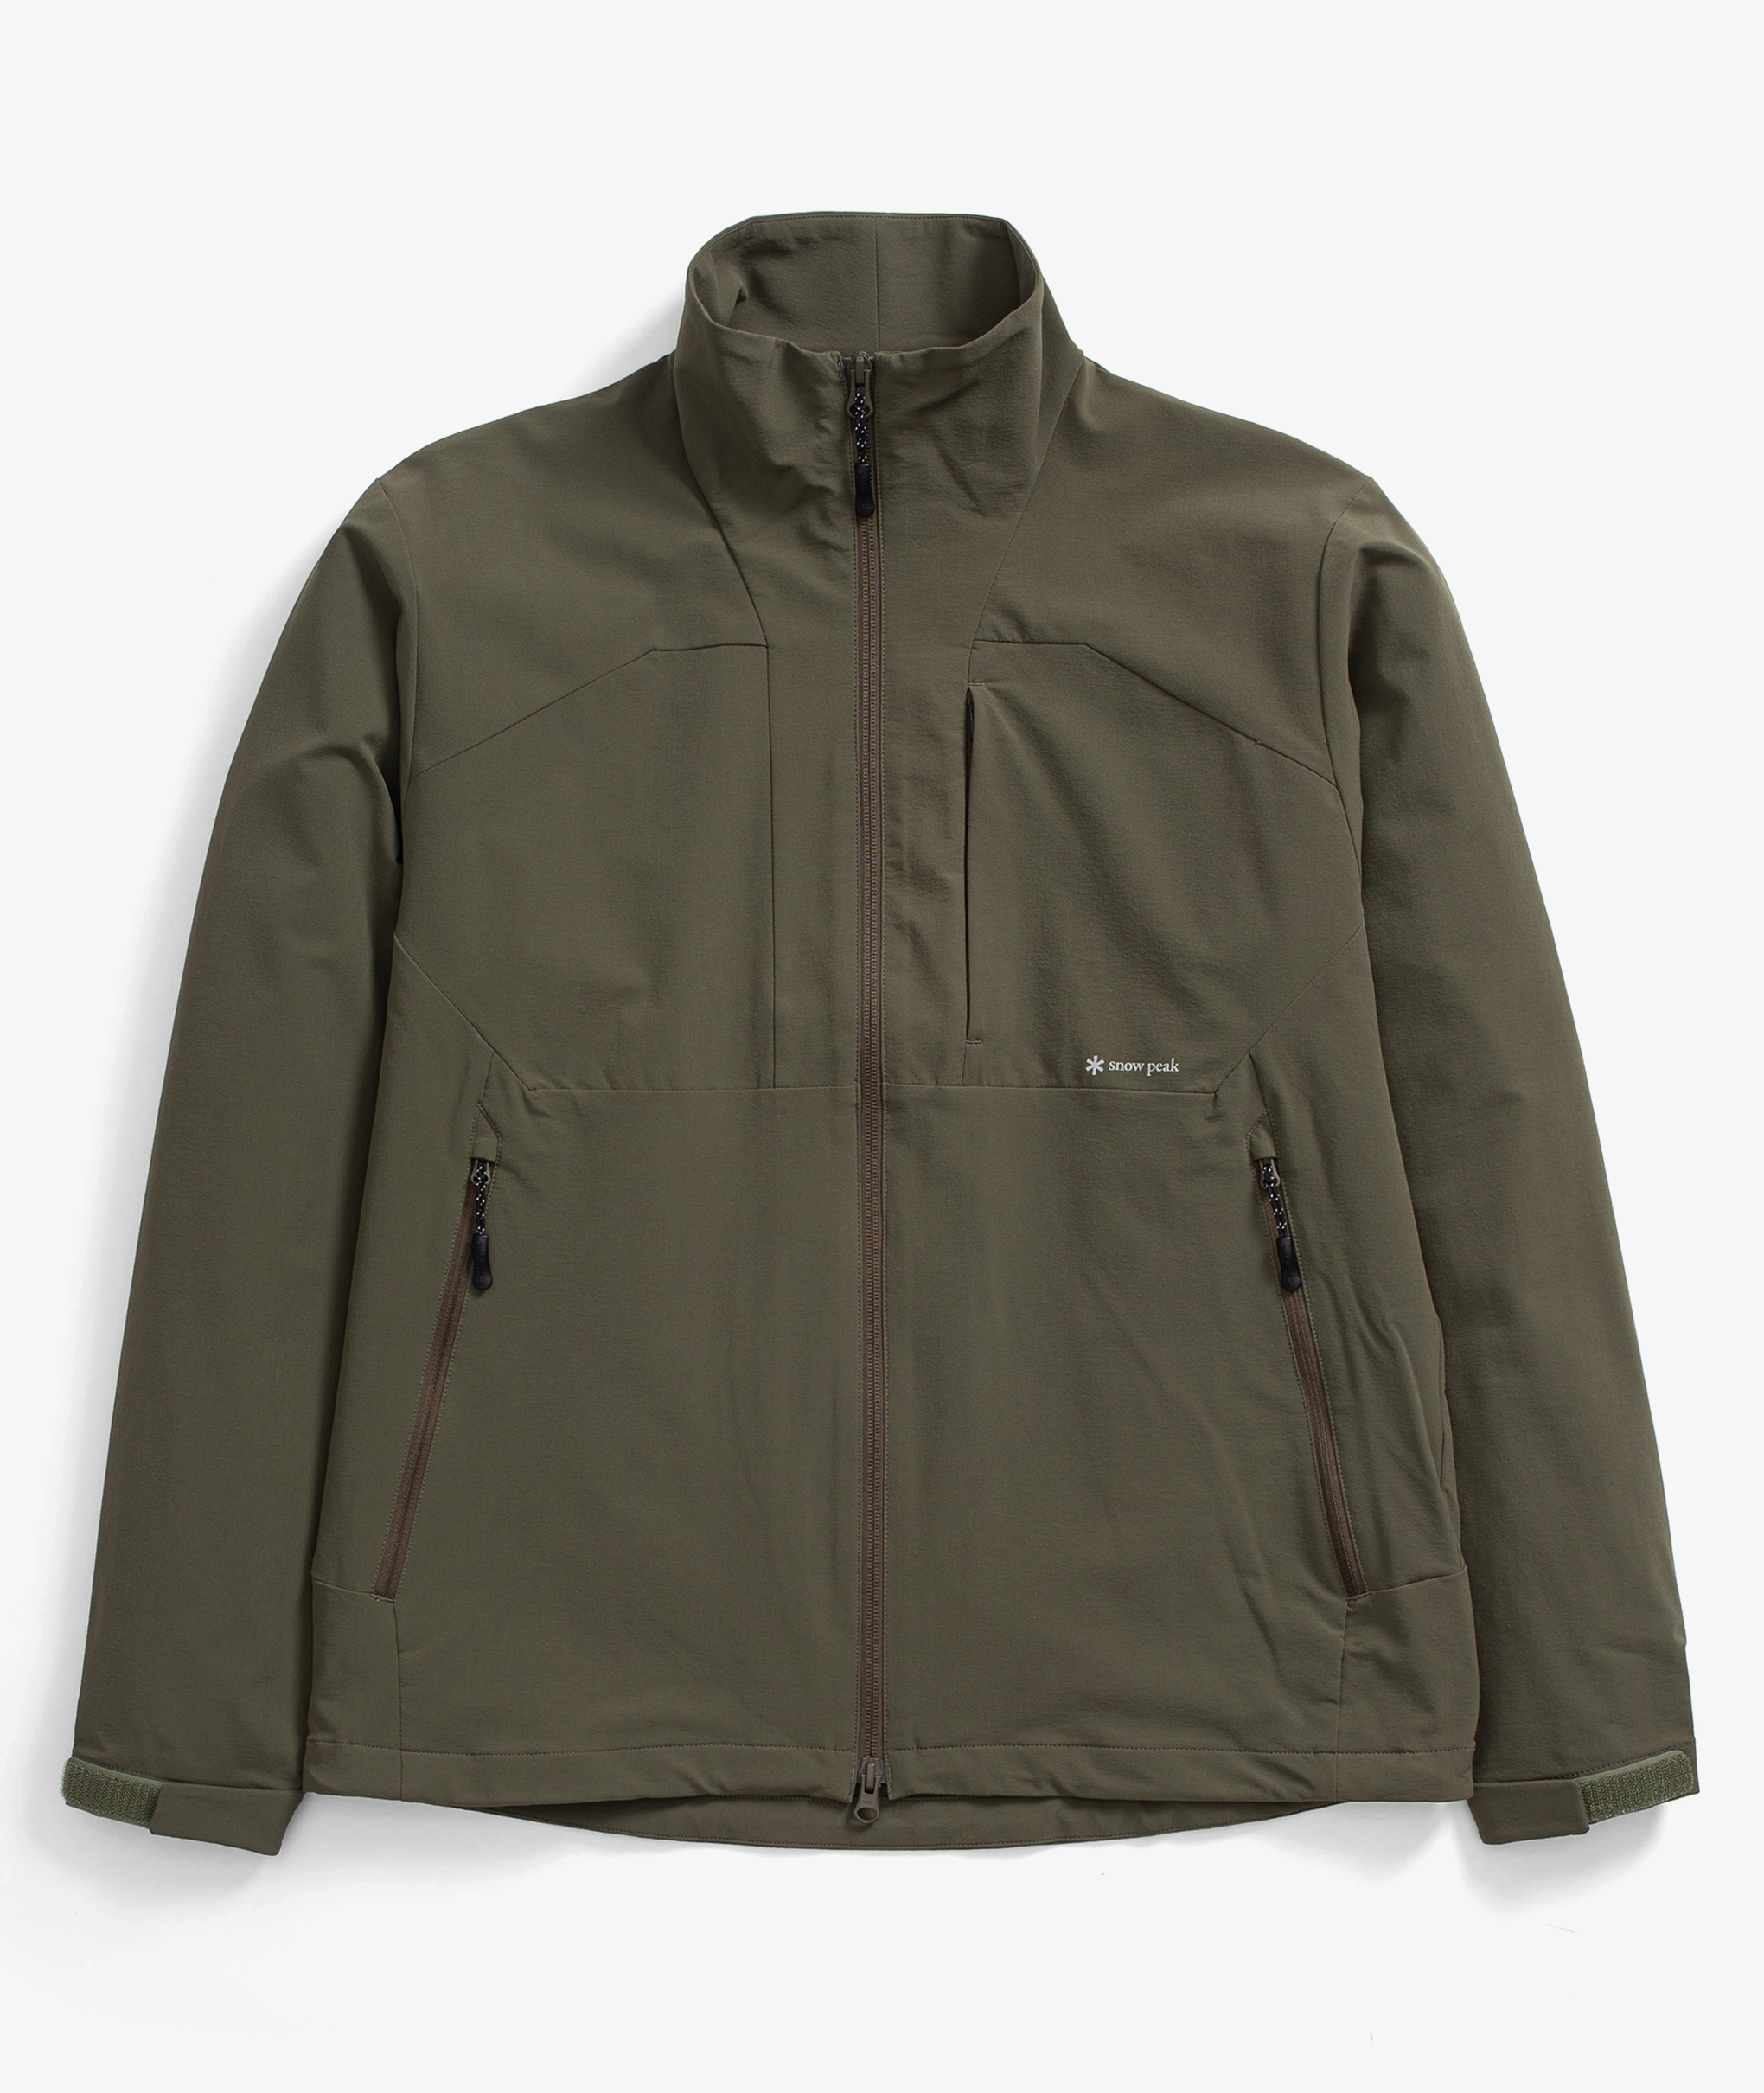 Norse Store | Shipping Worldwide - Snow Peak DWR Comfort Jacket - Olive